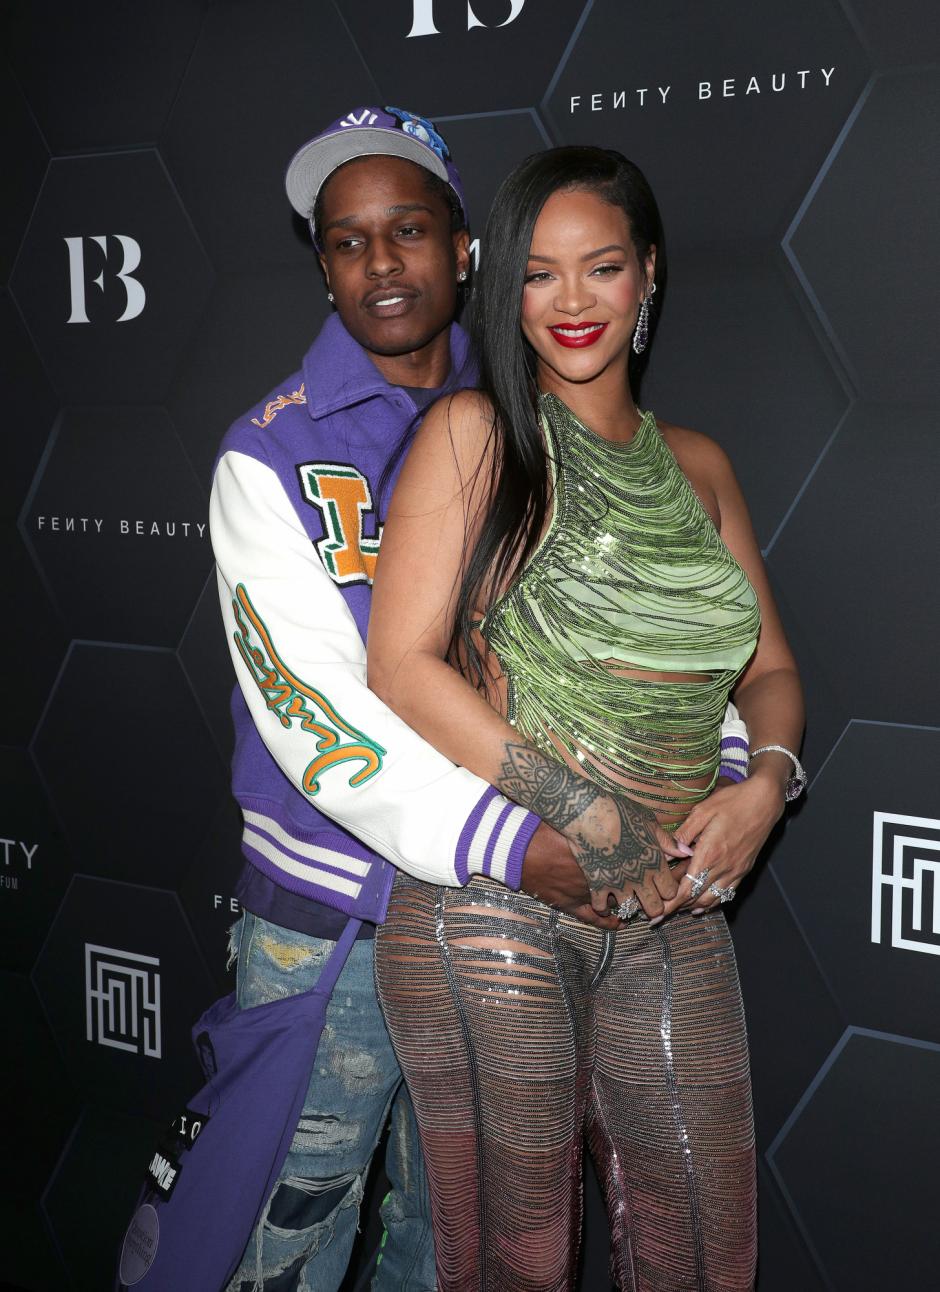 Singers Rihanna and ASAP Rocky at Fendy event in Los Angeles